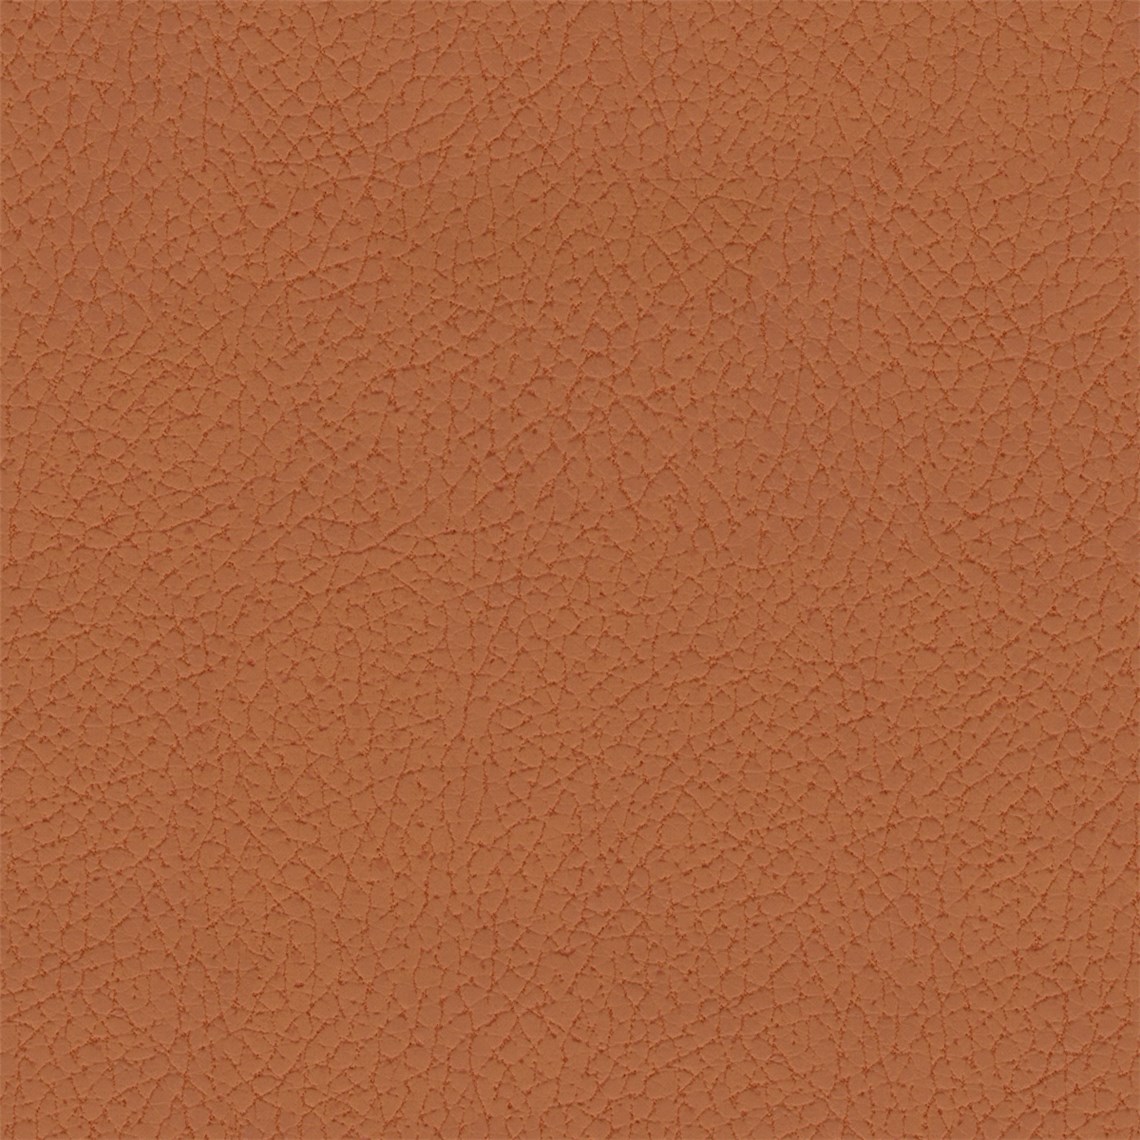 Reel_Leather_Copper